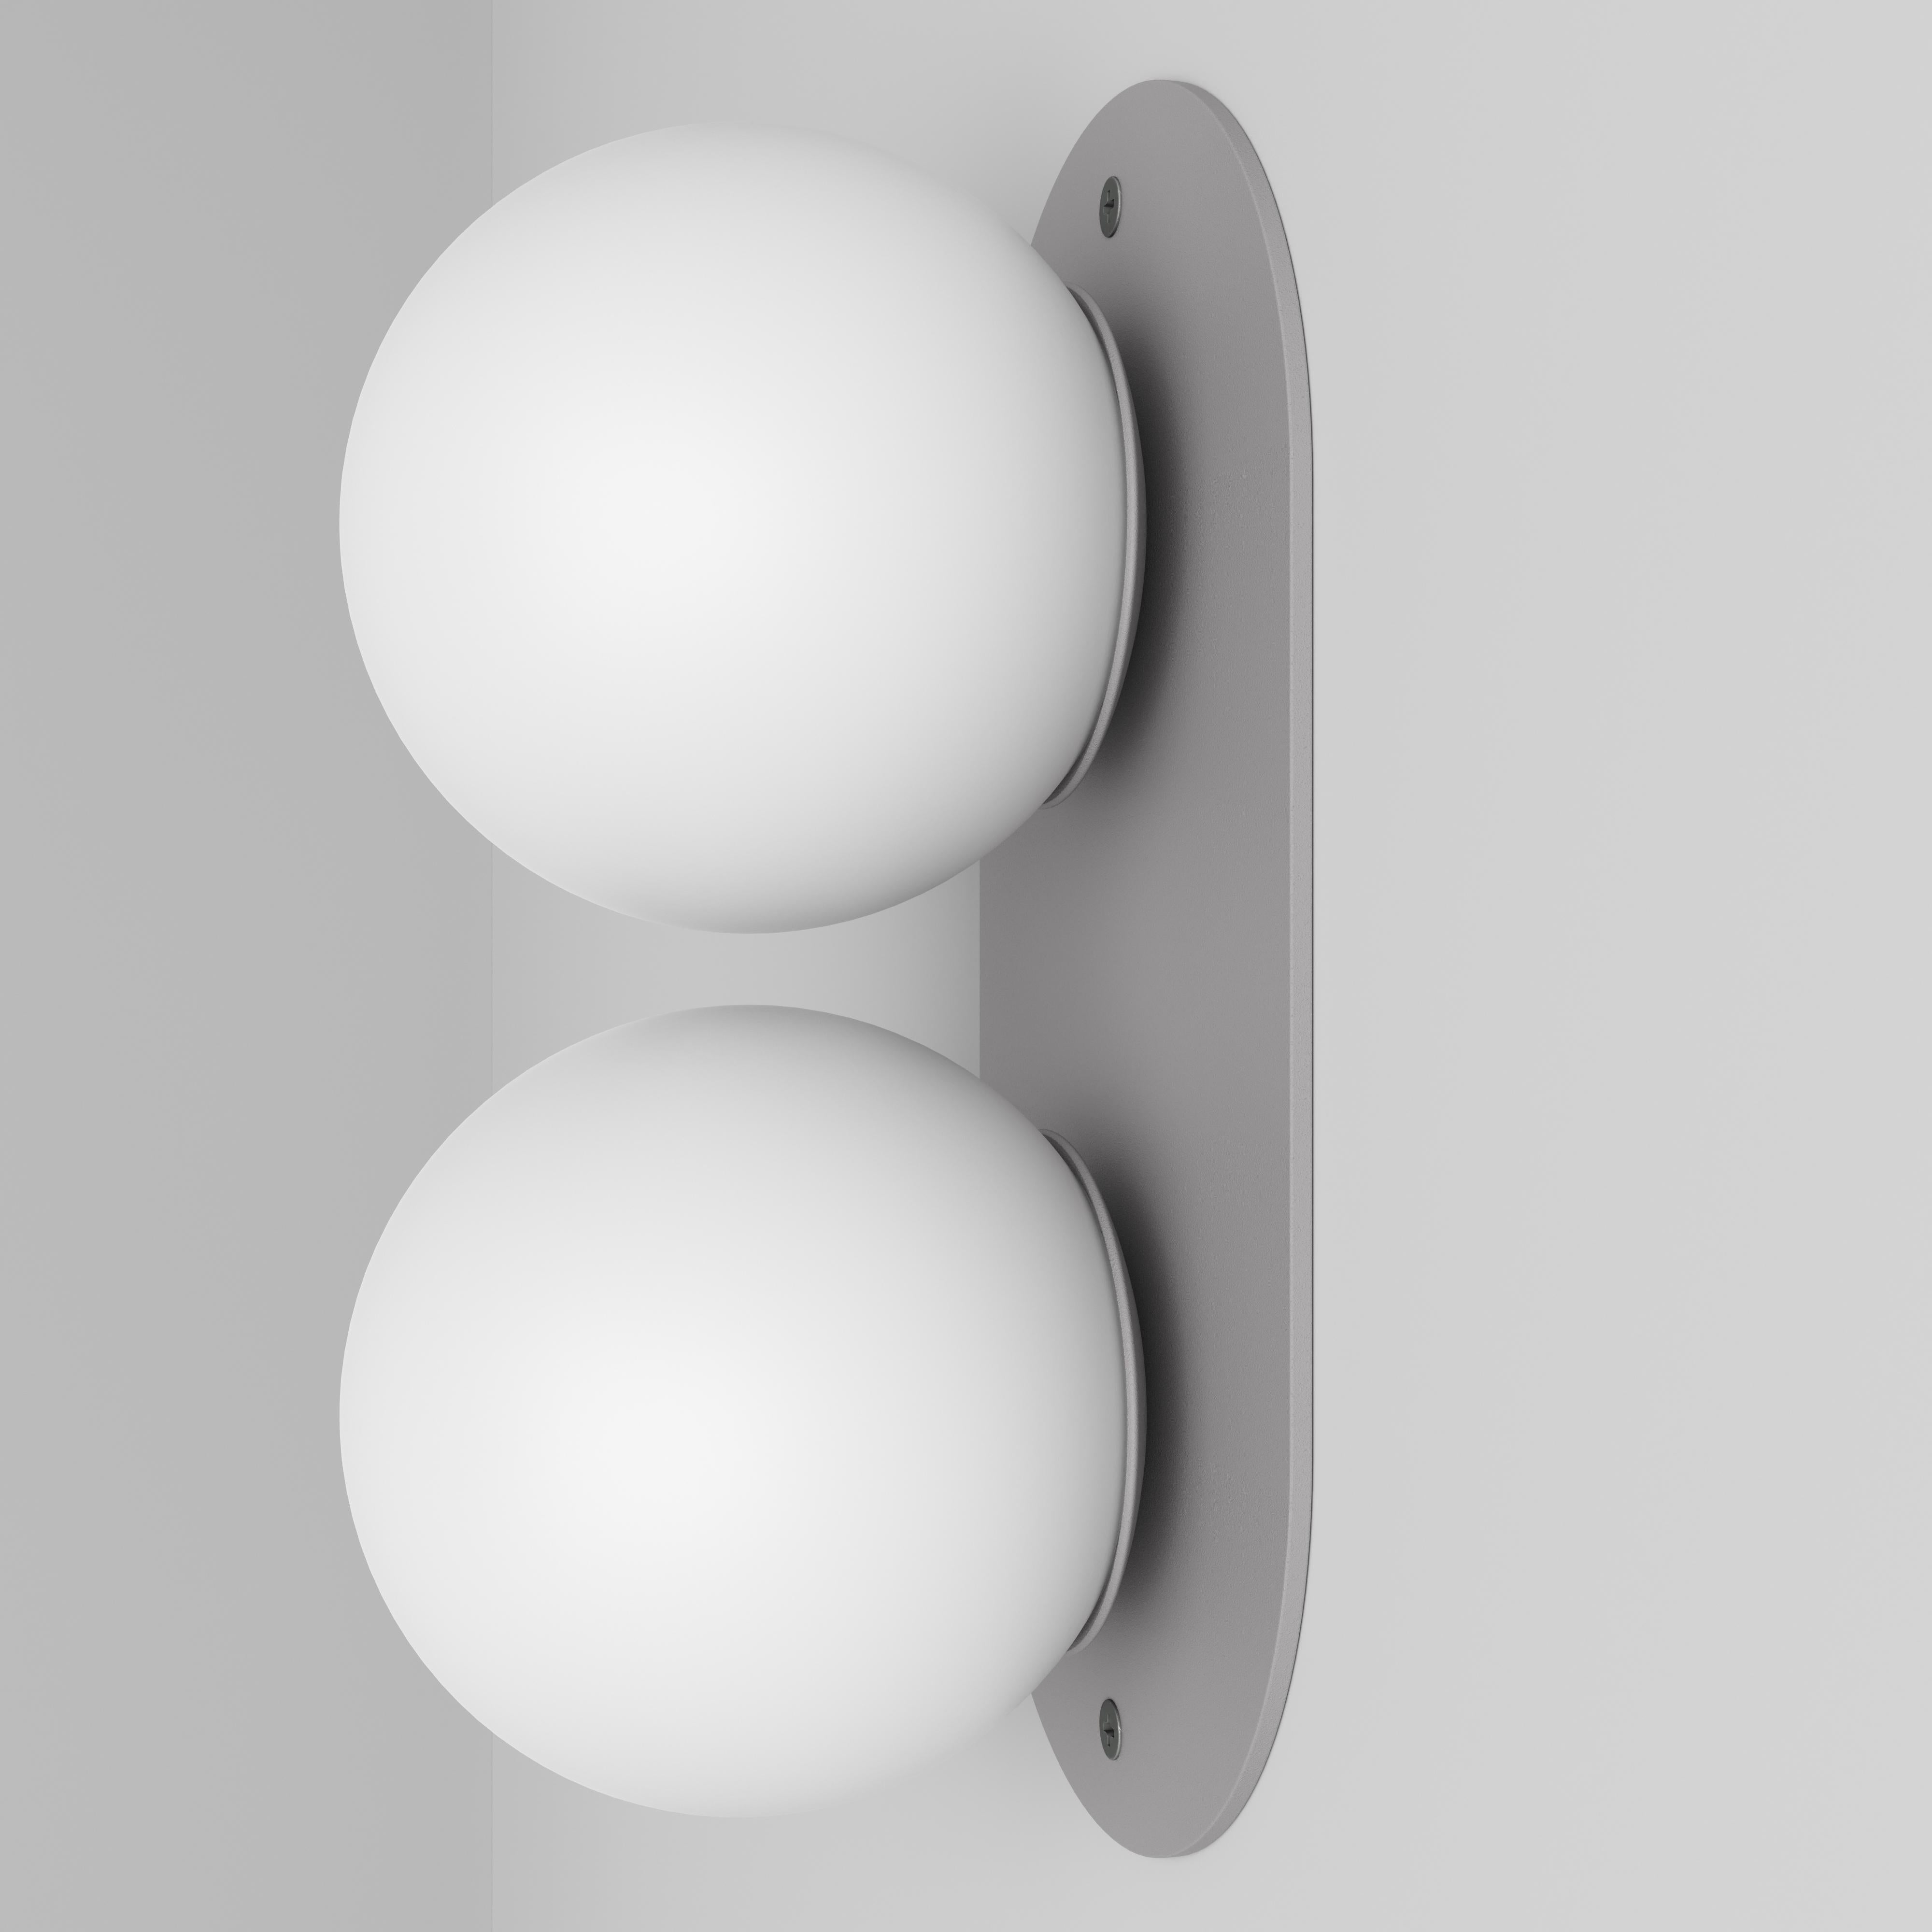 Contemporary Minimalistic Wall Lamp, Modern Steel Lighting, Glass Sphere Edition For Sale 2